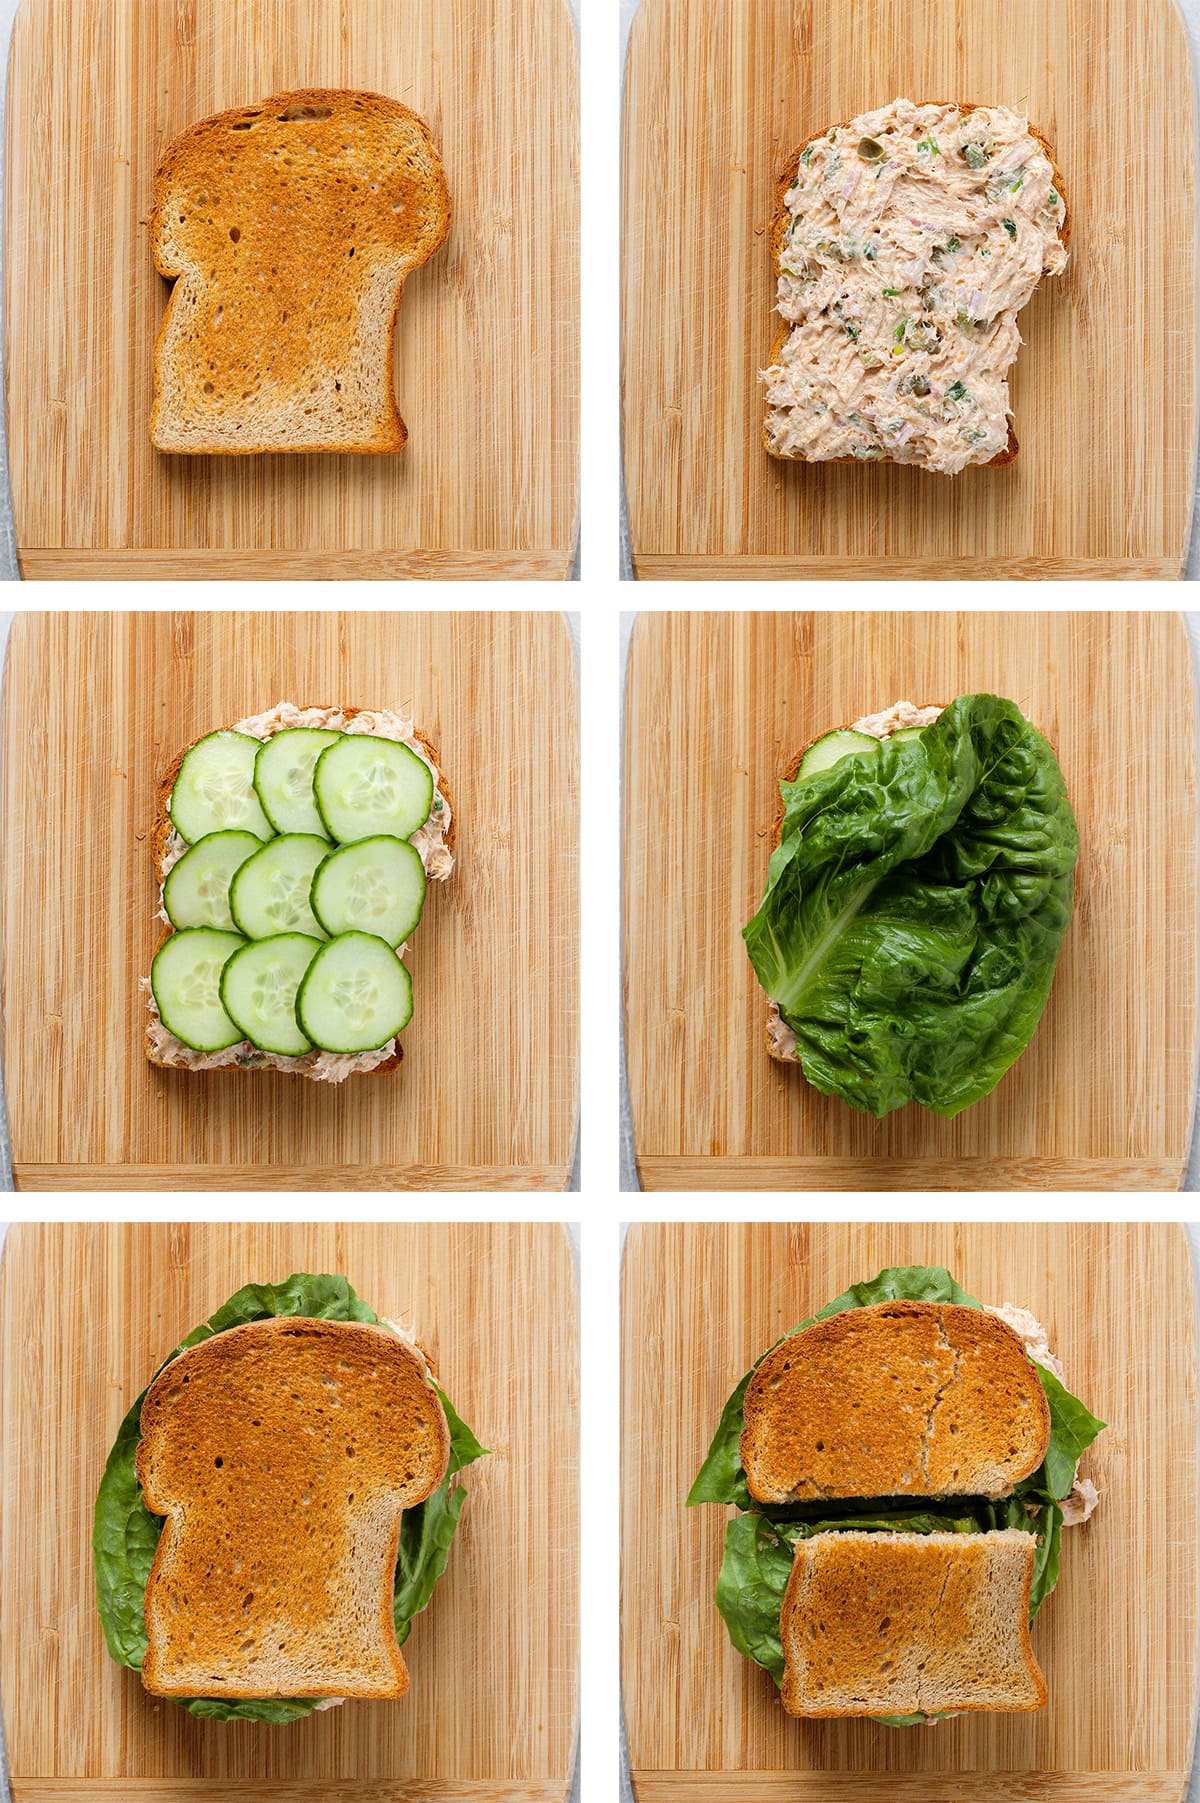 Step by step making of tuna sandwich layering the spread, cucumber, and lettuce.